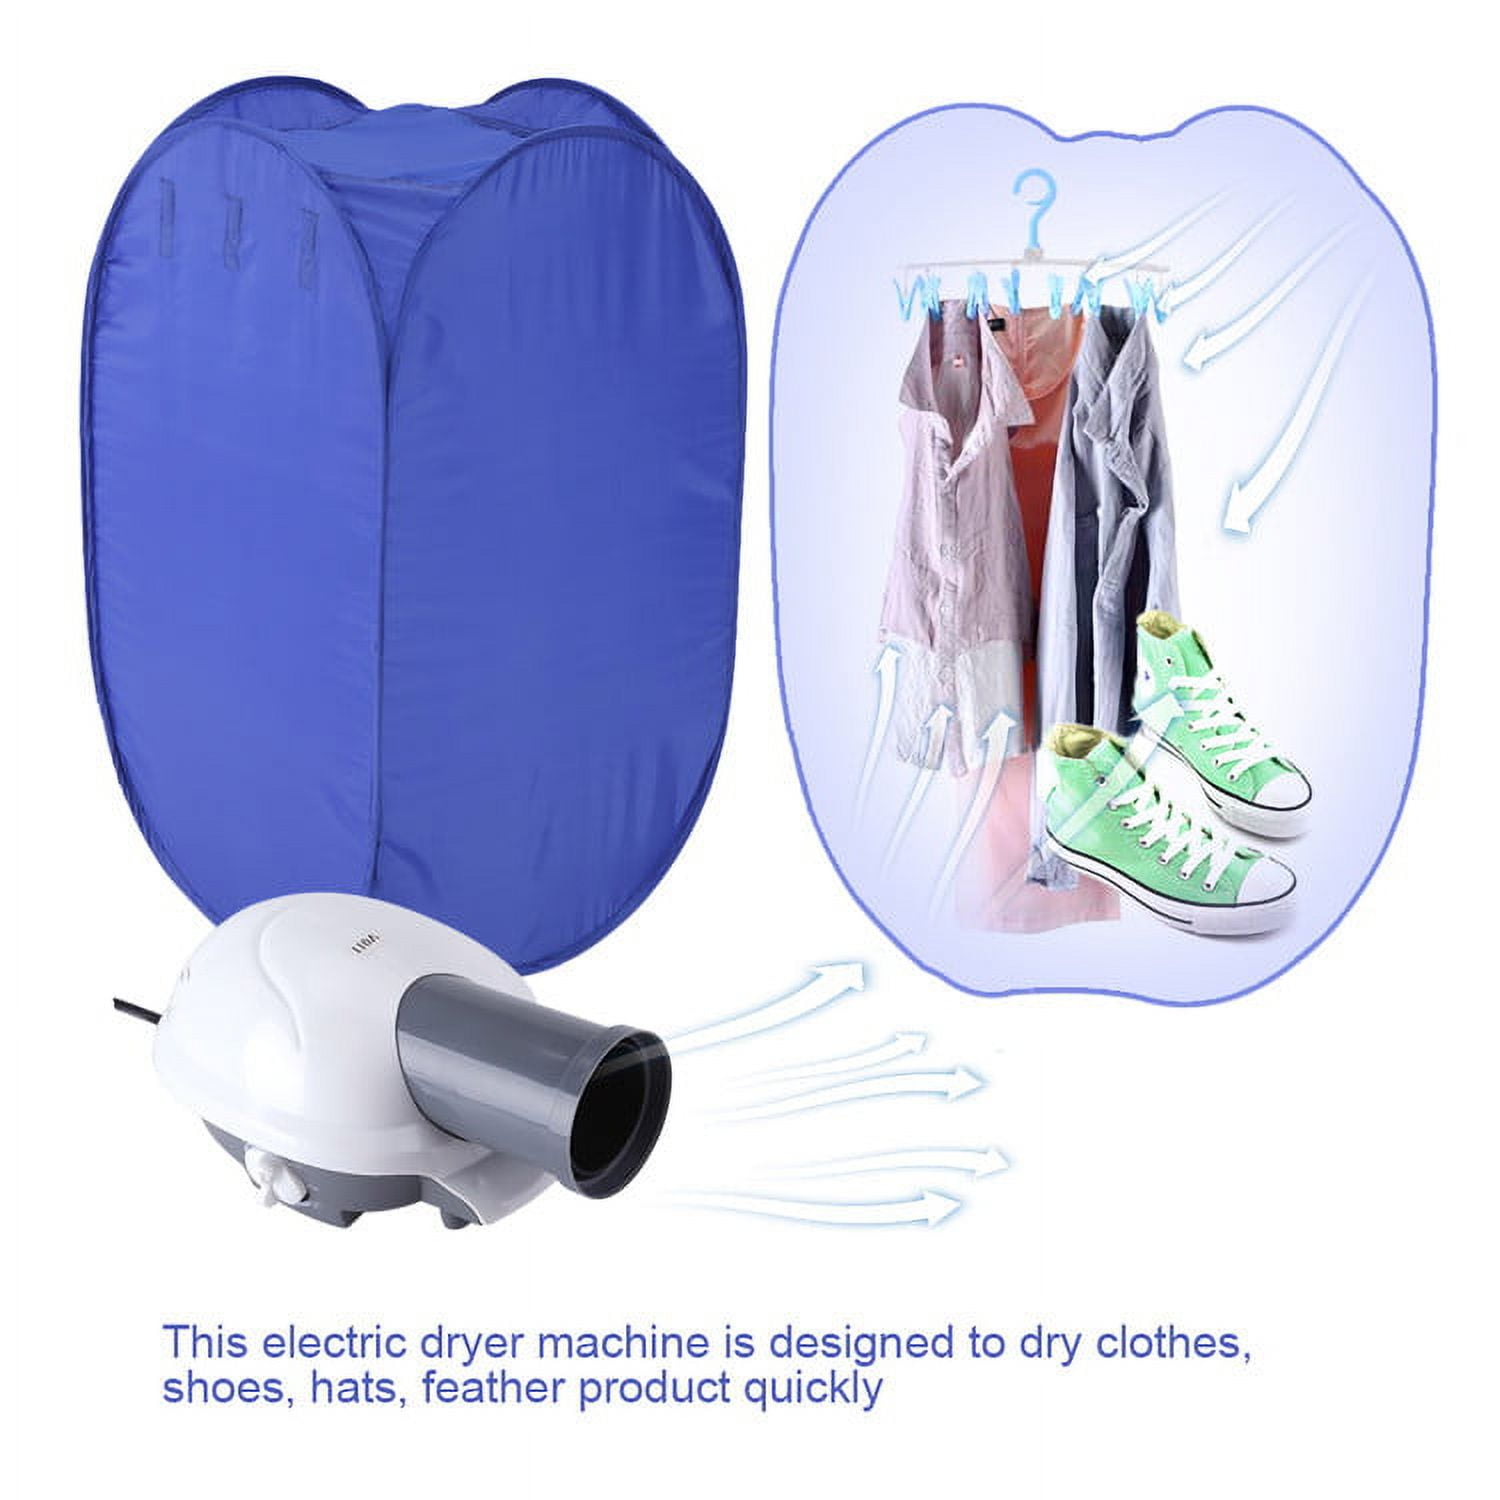 Irerts Compact Laundry Dryer, 1020W 1.41cu ft Portable Clothes Dryer with 5 Modes, Stainless Steel Tub, Wall Mount Kit, Front Load Electric Clothes